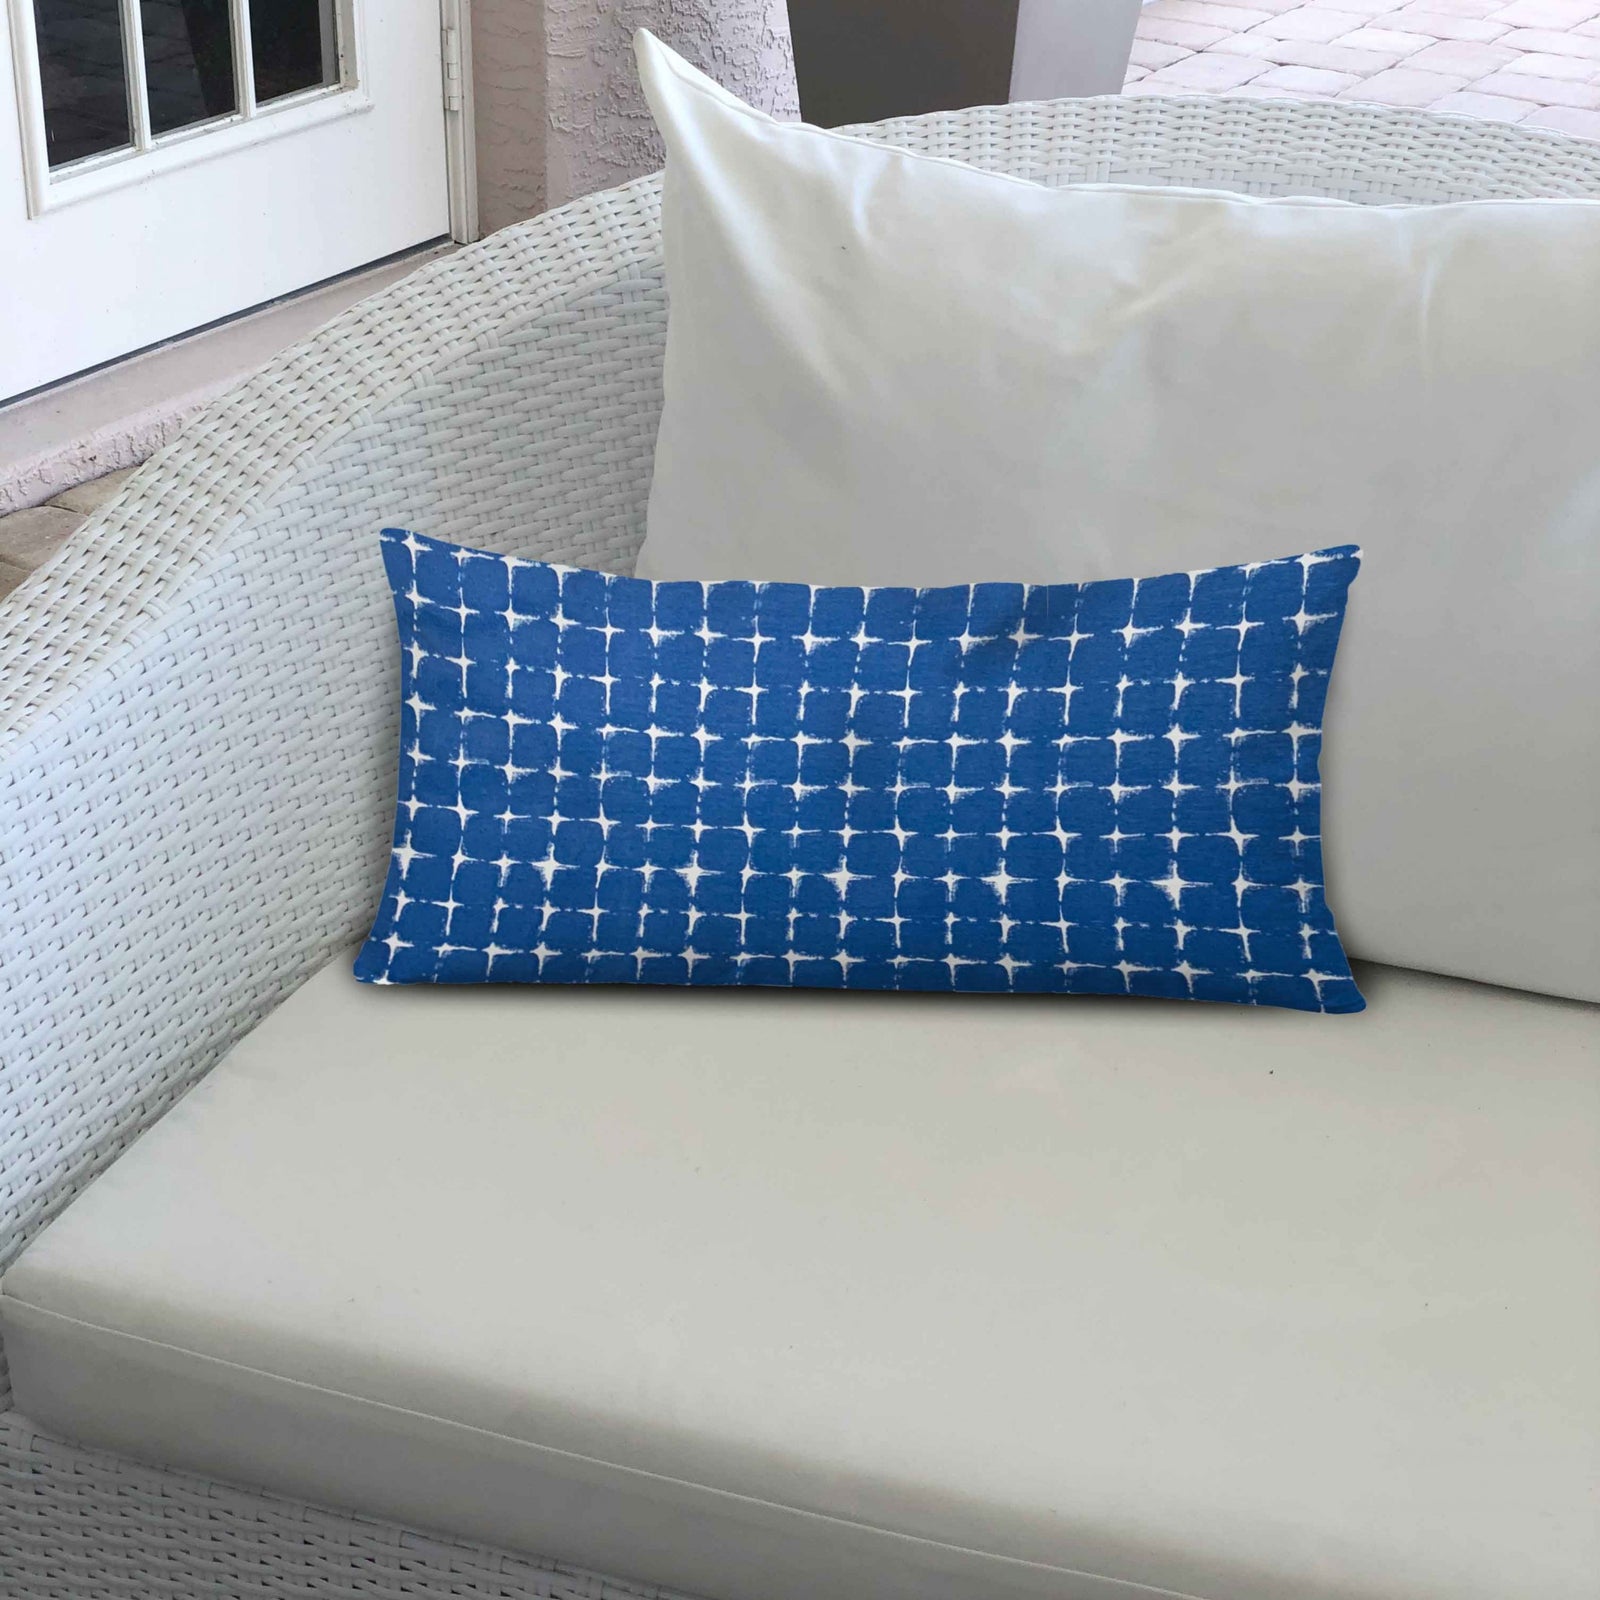 12" X 16" Blue And White Zippered Gingham Lumbar Indoor Outdoor Pillow